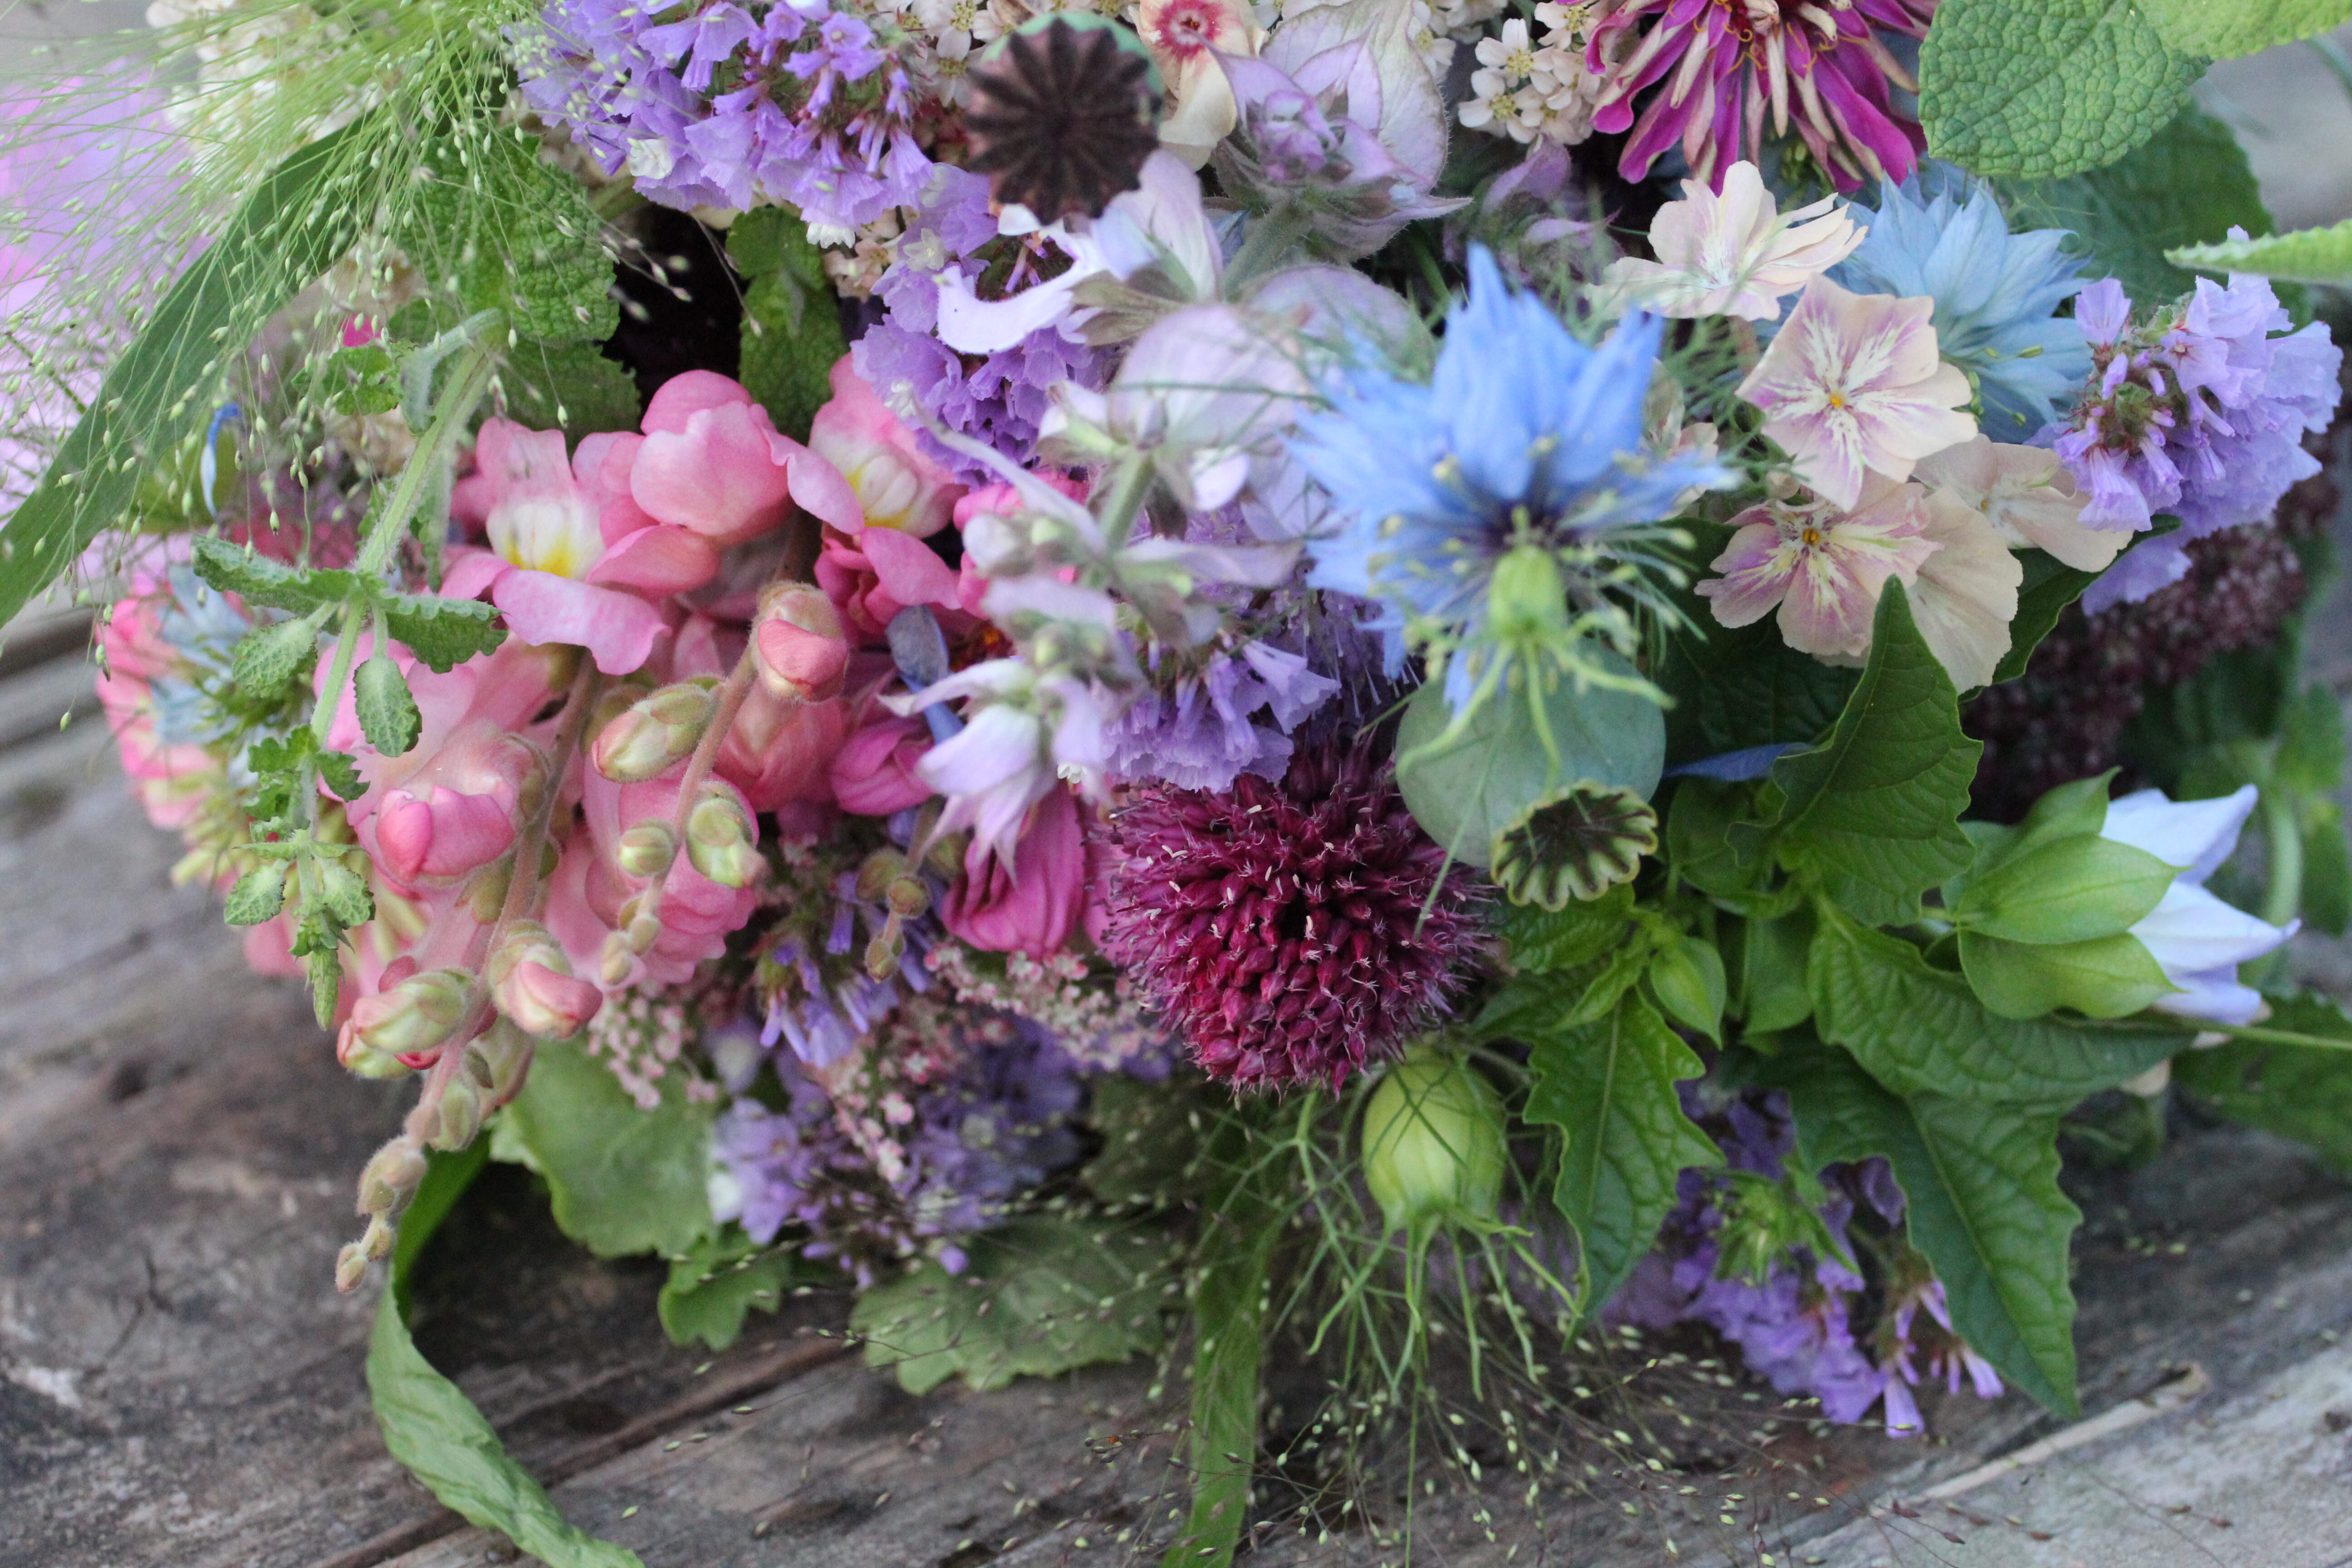 Pink, green and purple wedding bouquet of snapdragons, nigella flowers, statics and mixed foliage